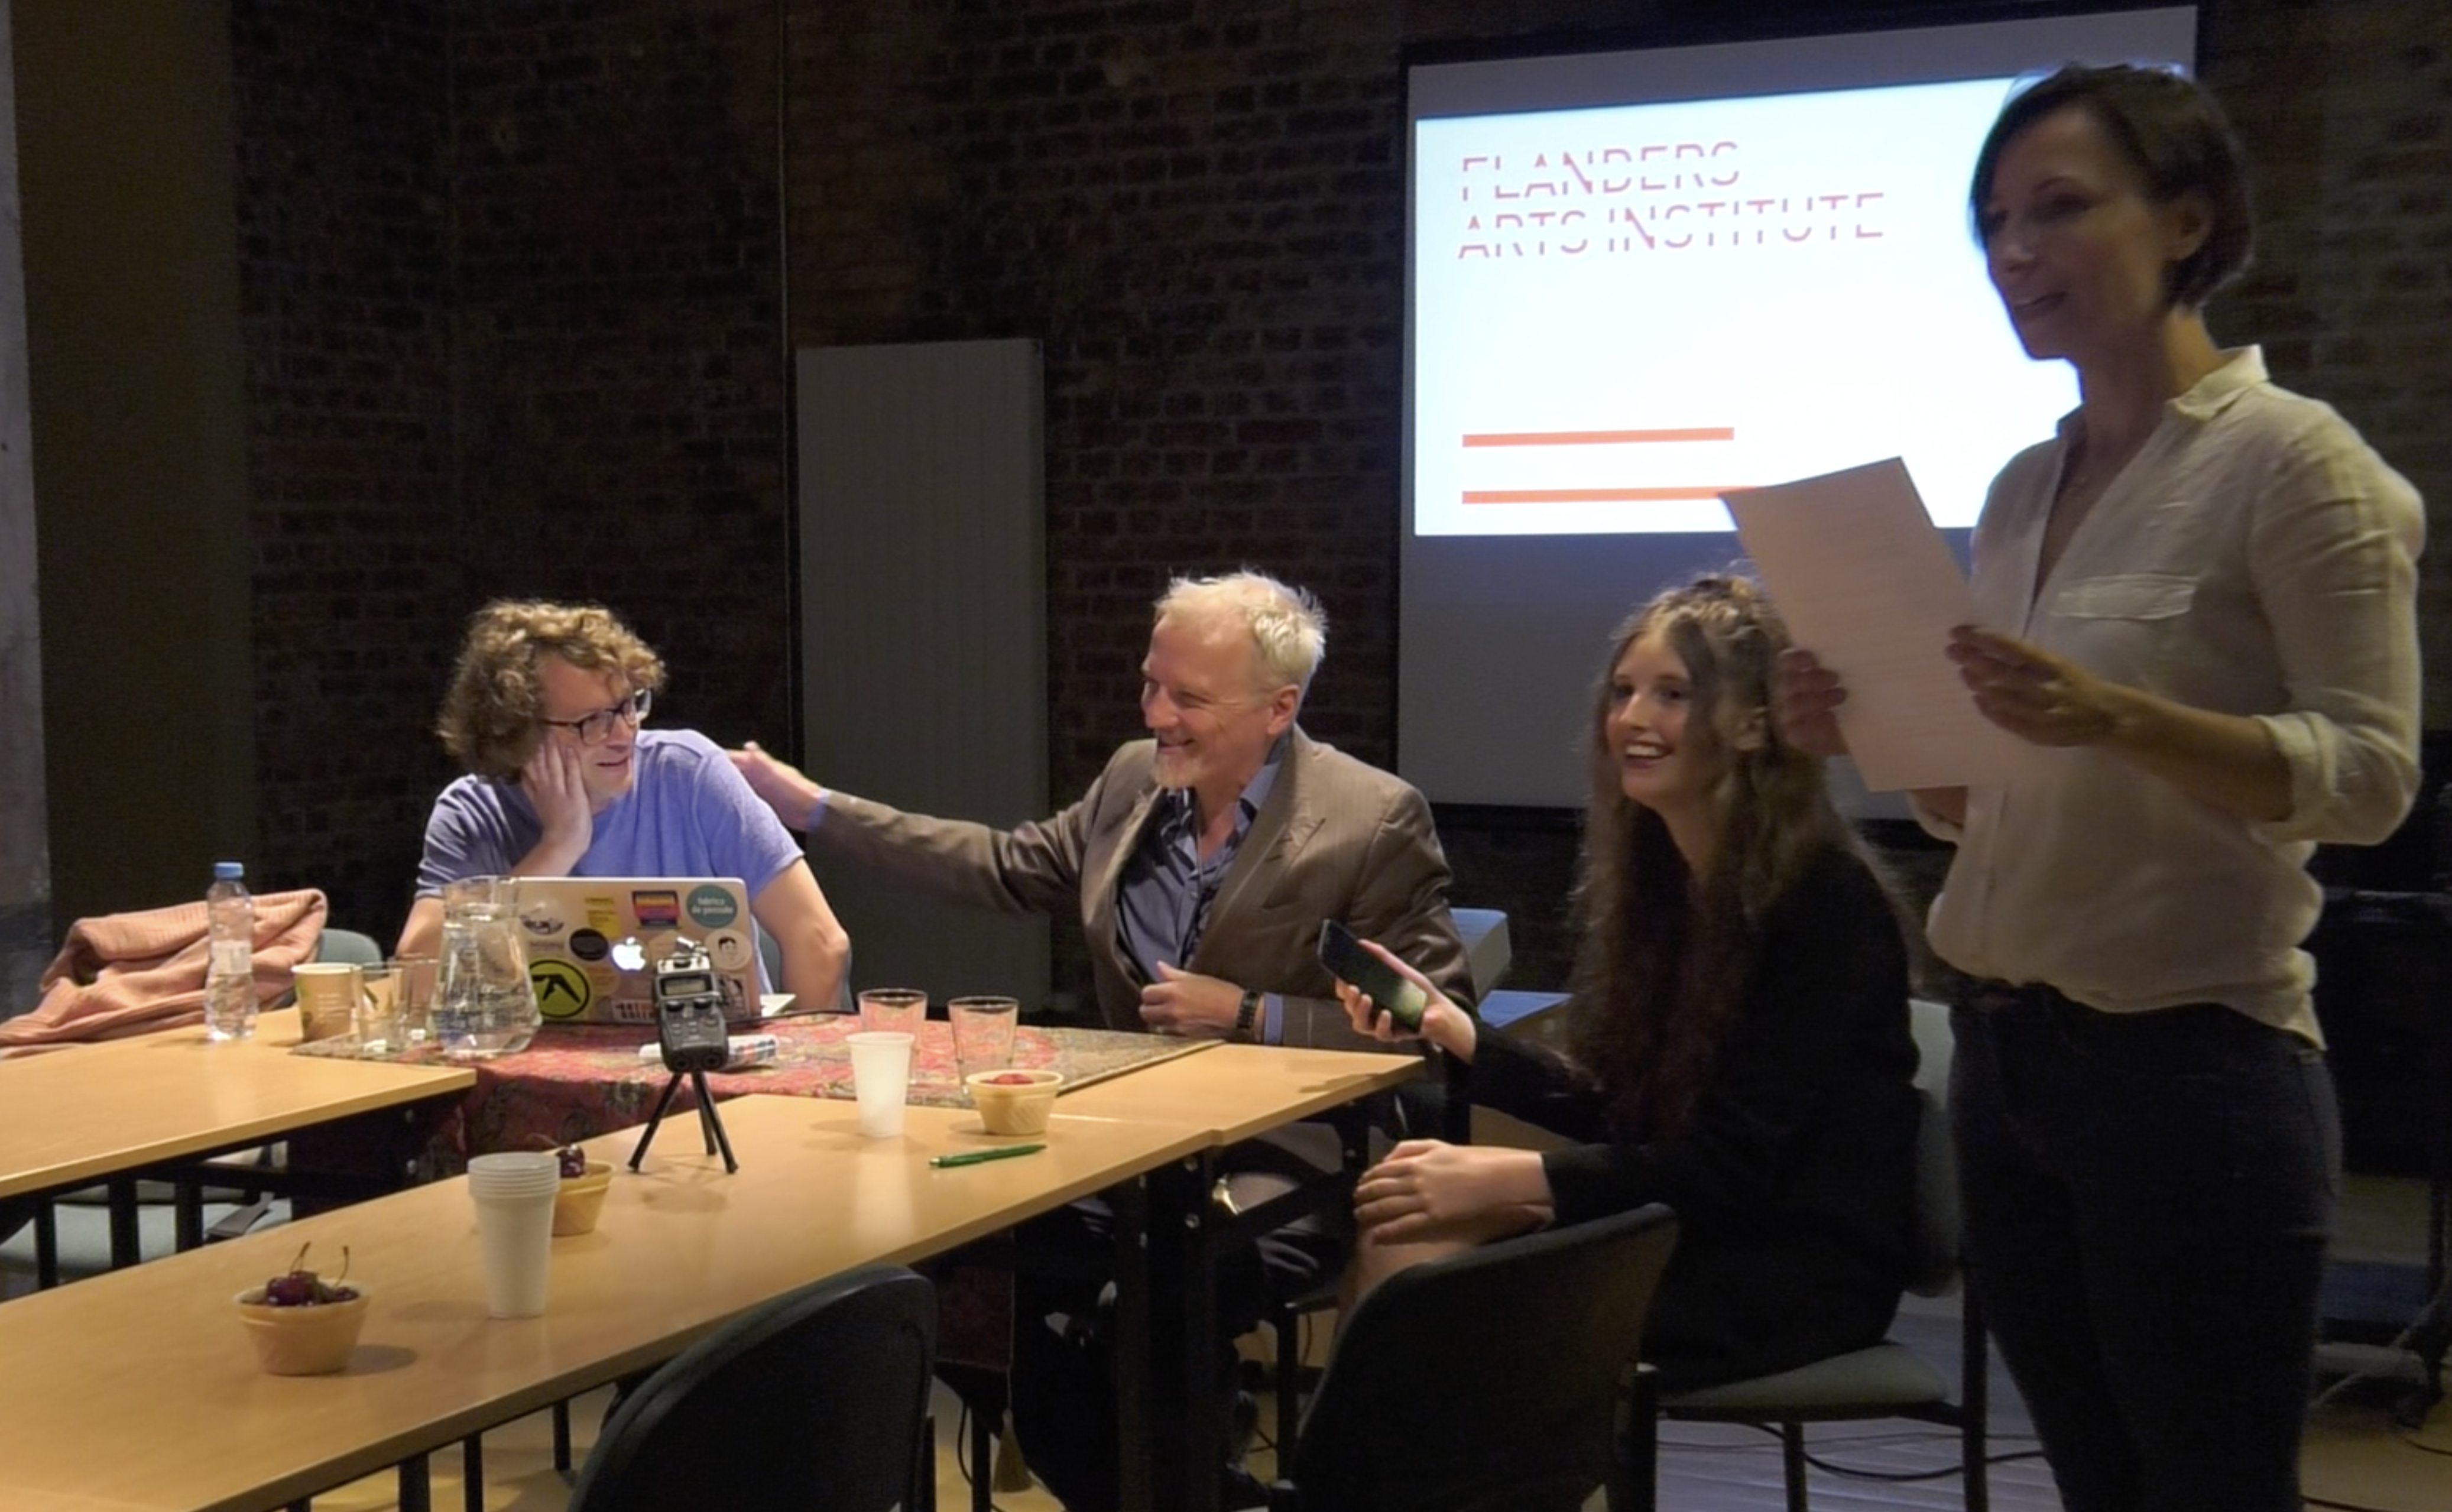 From left: Joris Janssens, Jan Lauwers, Lisaboa Houbrechts, Agata Siwiak, 'Theatre, Artistic and Research Collectives' conference, Adam Mickiewicz University in Poznań, 19 June 2018. Photo from the recording by Anna Paprzycka.